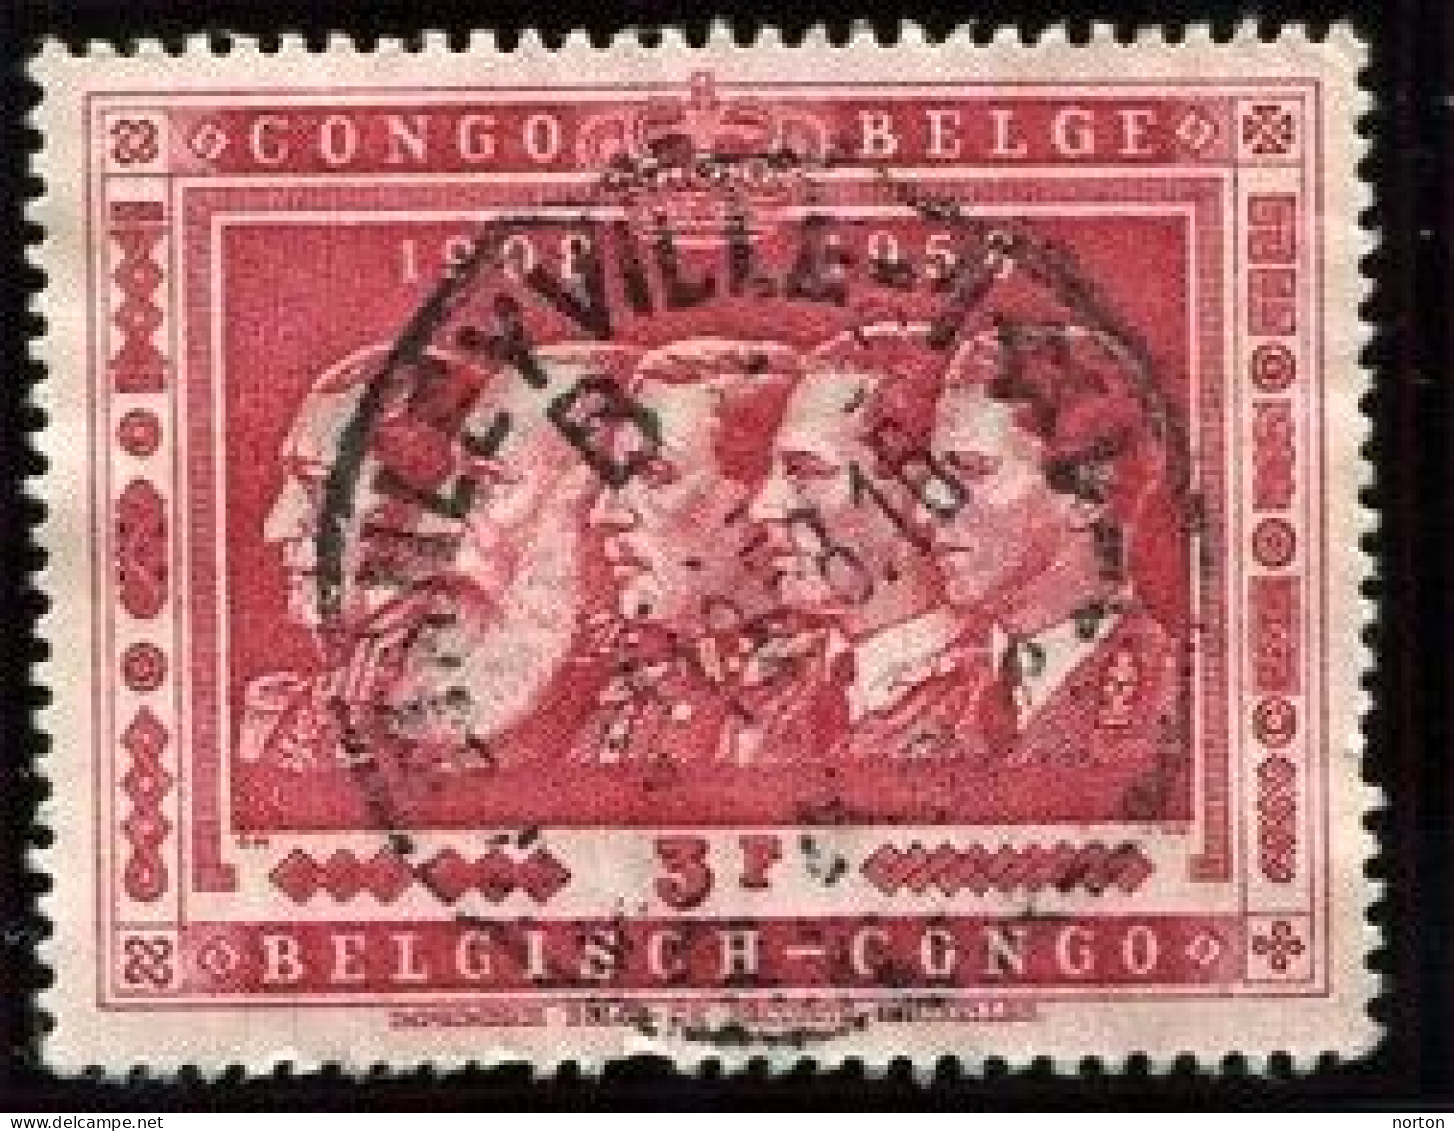 Congo Stanleyville 1 Oblit. Keach 12B(B)1 Sur C.O.B. 346 Le 31/12/1958 - Used Stamps